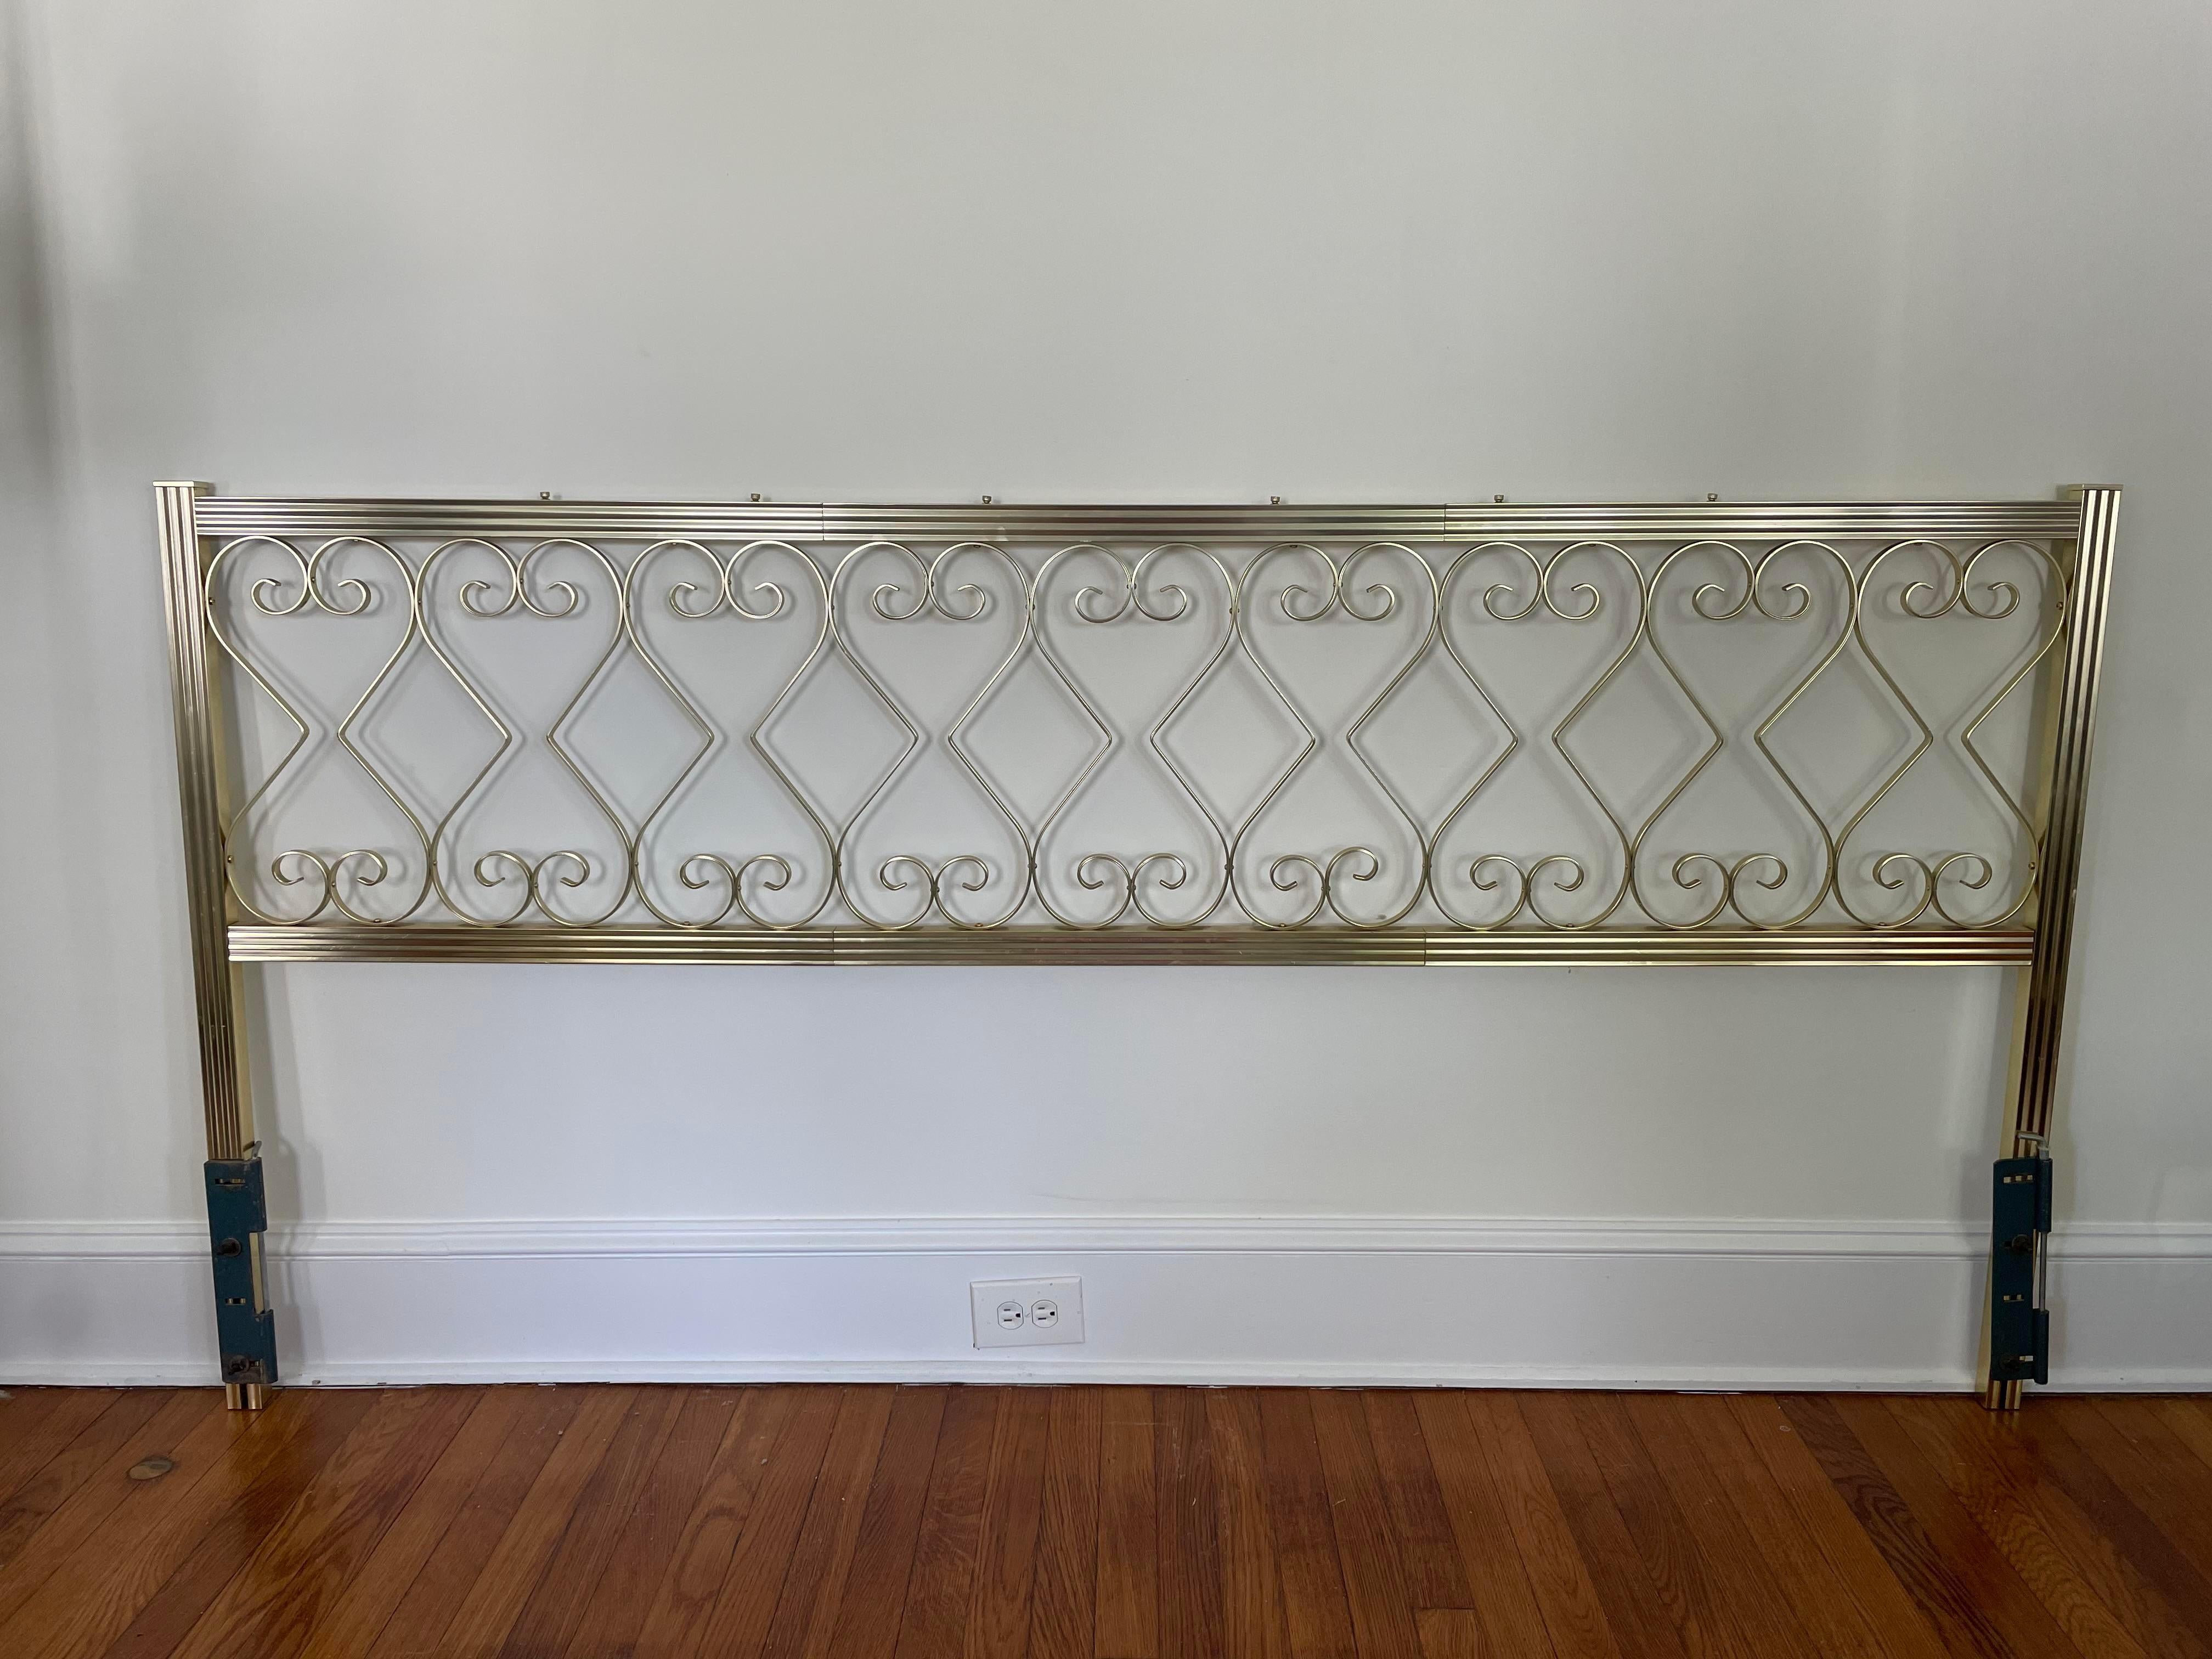 Beautiful Hollywood Regency Polished Aluminum Scrolled Headboard. Scrolled finial top piece can be removed for a more streamlined modern look.
Curbside to NYC/Philly $300